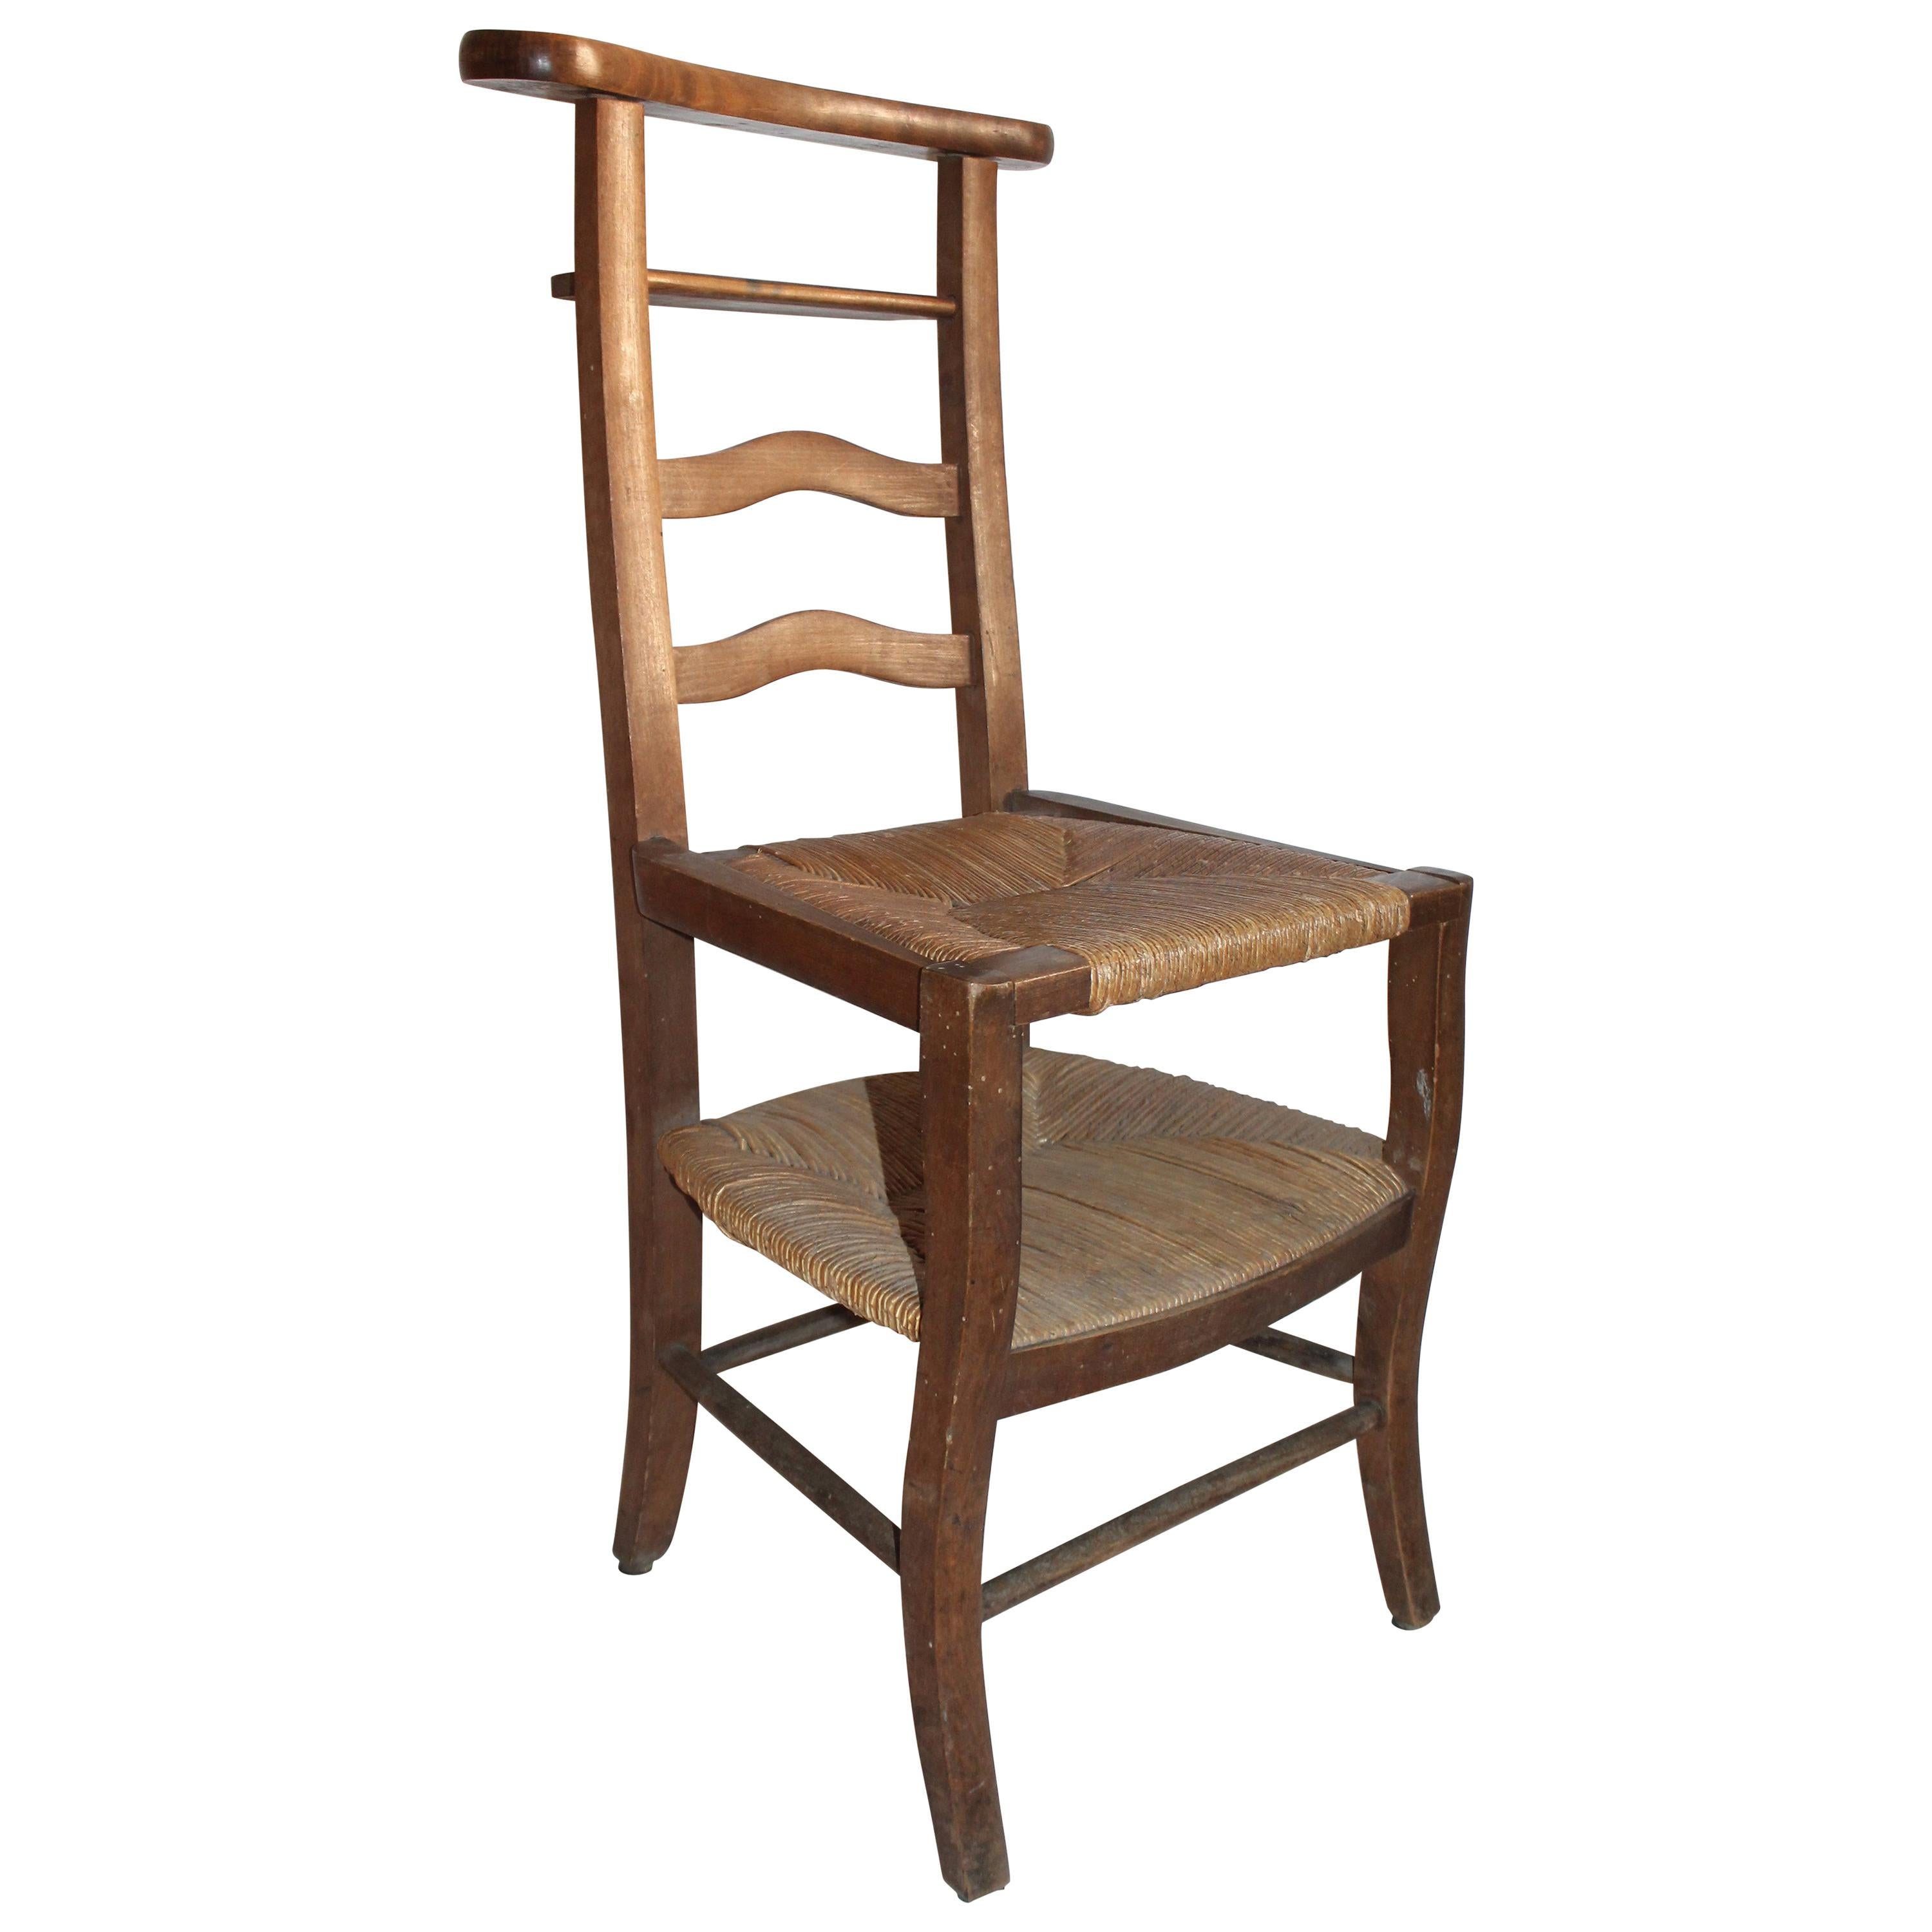 19th Century High Chair with Lift Top Seat